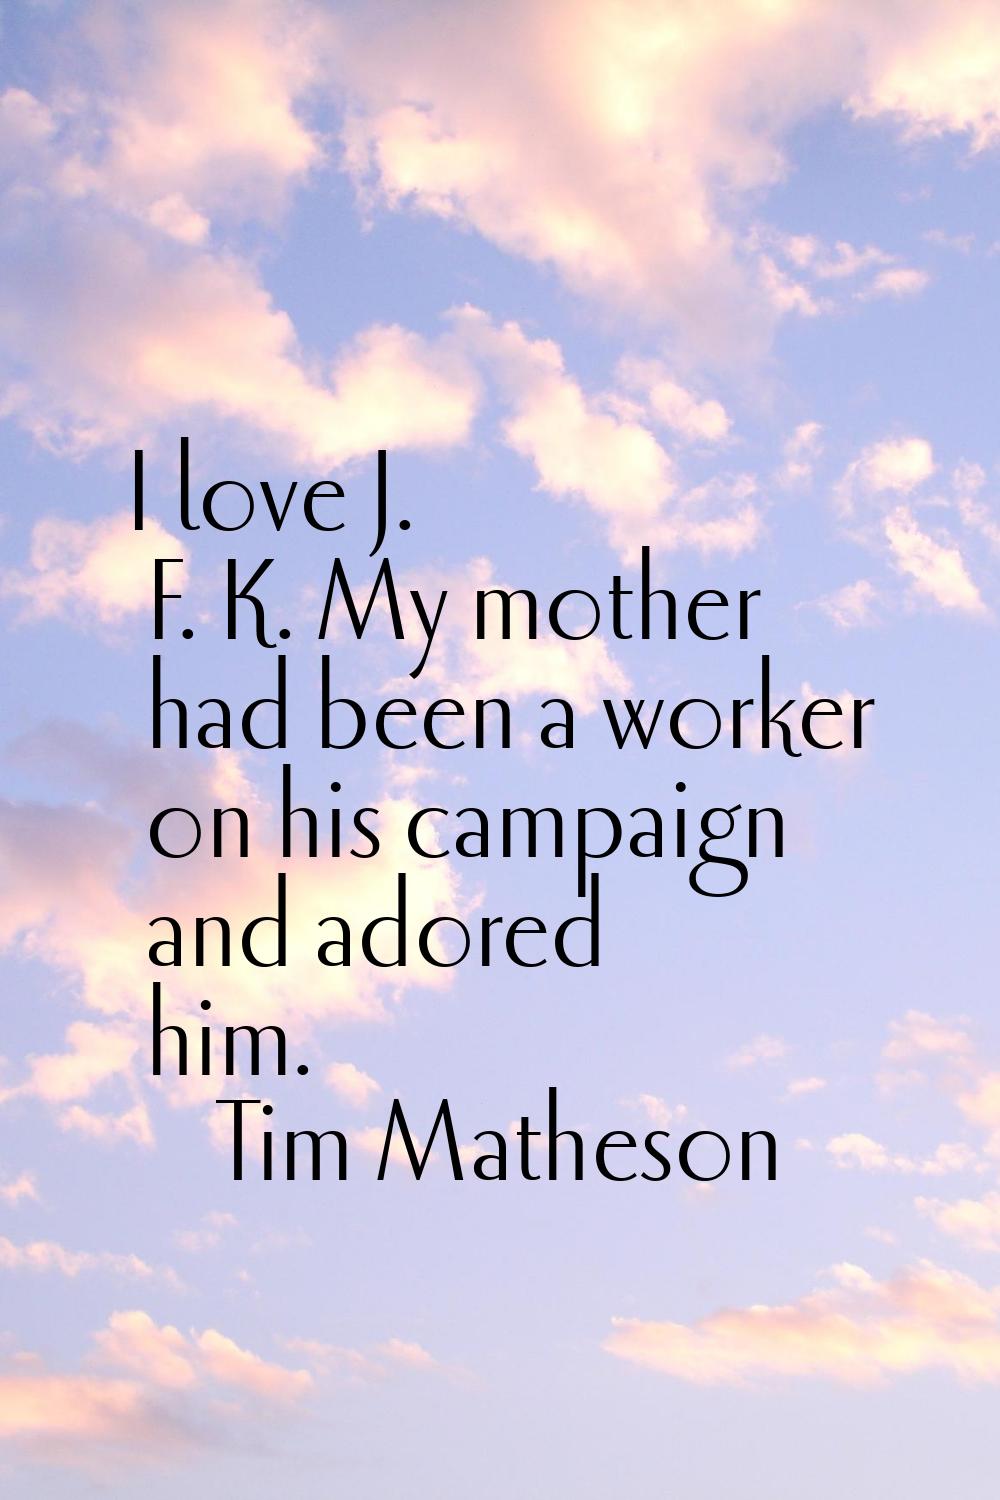 I love J. F. K. My mother had been a worker on his campaign and adored him.